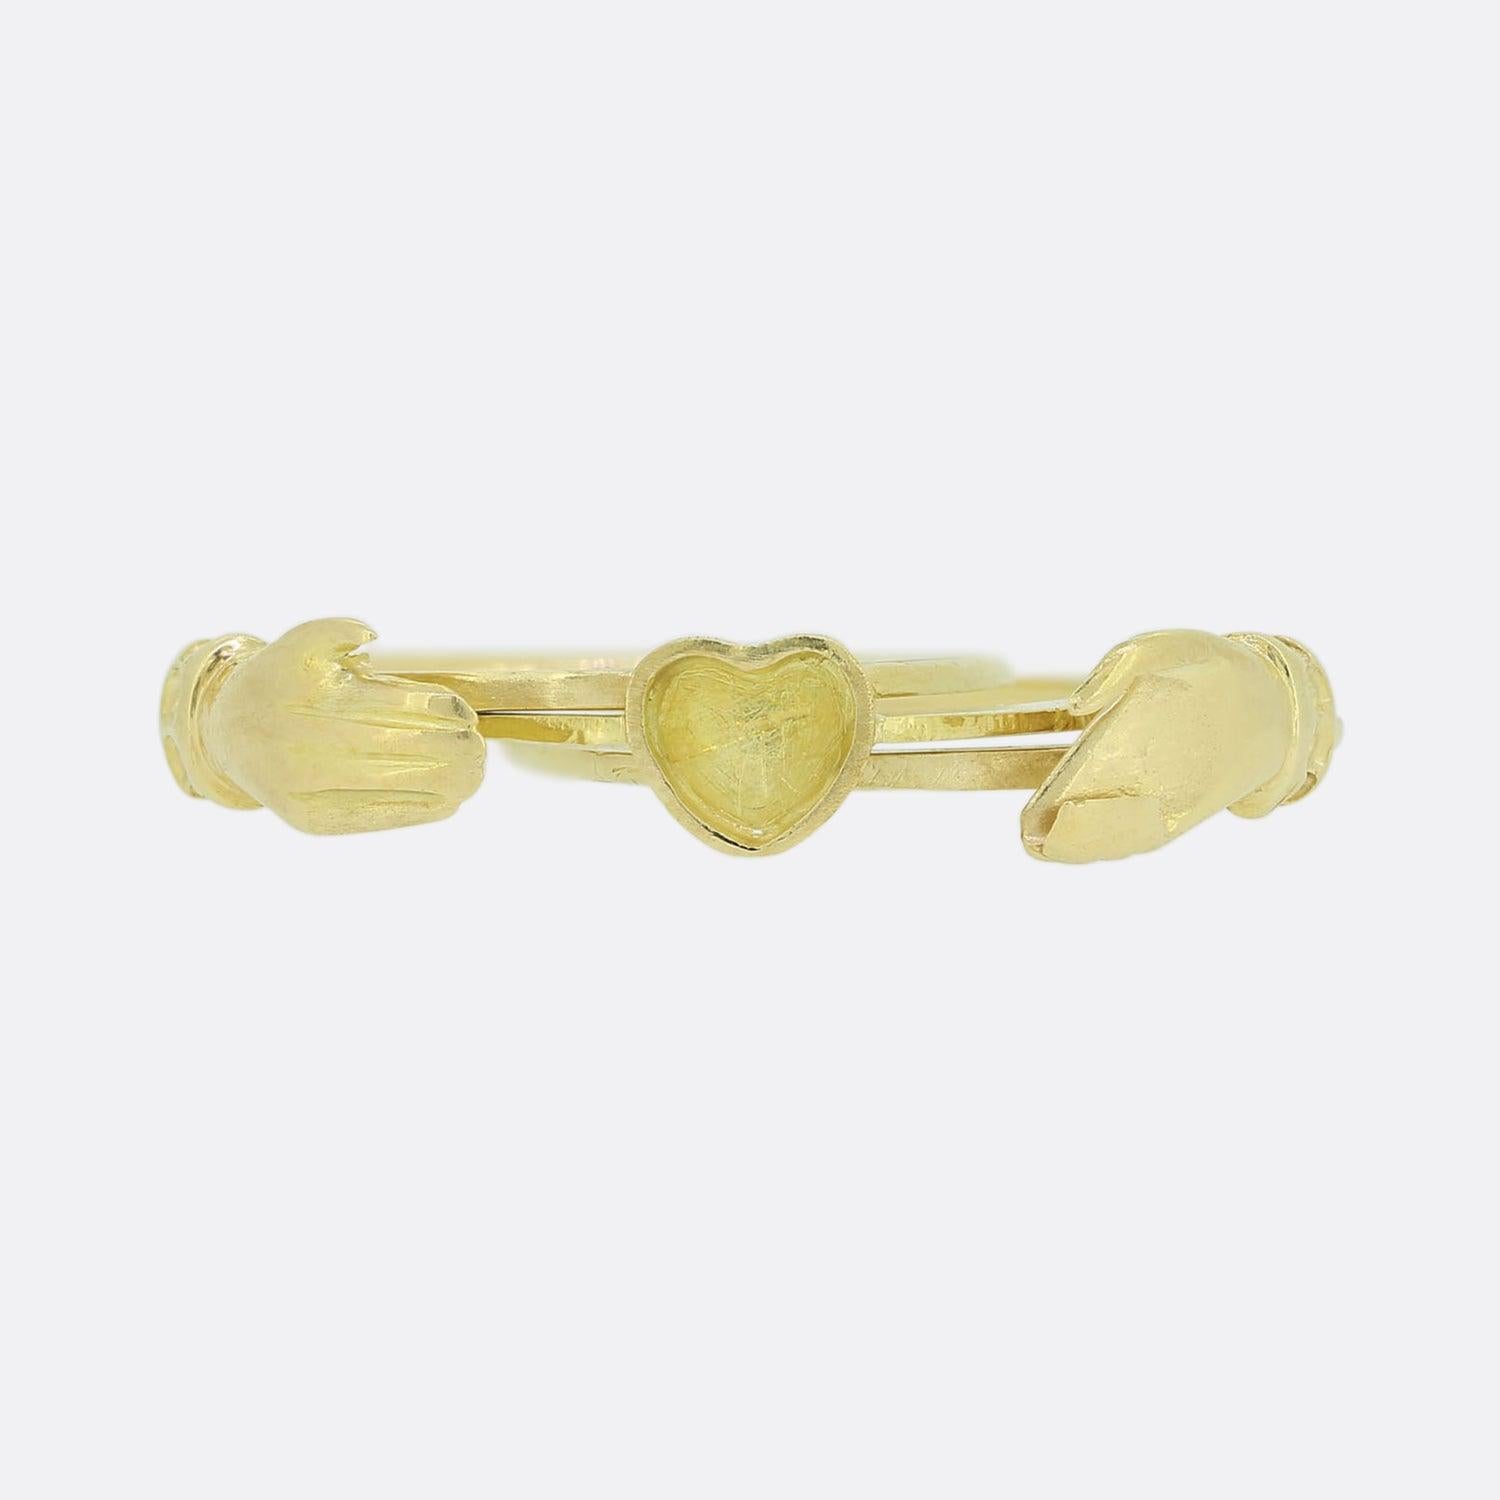 Here we have a vintage fede gimmel ring. The ring is comprised of three separate 18ct yellow gold hoops linked together with the same shank split lengthwise so the hoops fit together unnoticeably as one. Two interlocking hands pull apart to reveal a